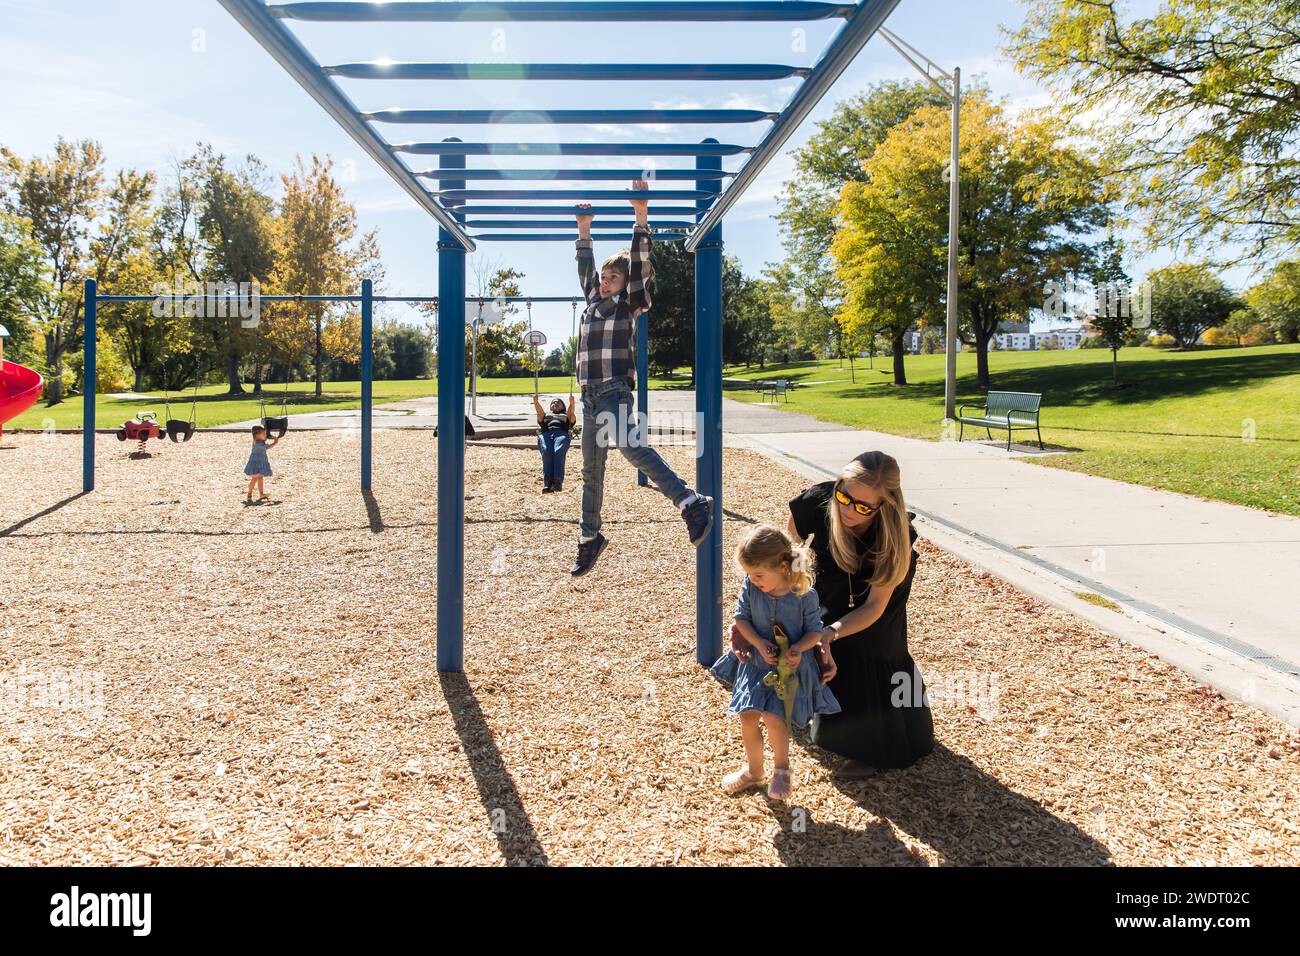 Brother does monkey bars while mom helps sister with dinosaur toy Stock Photo